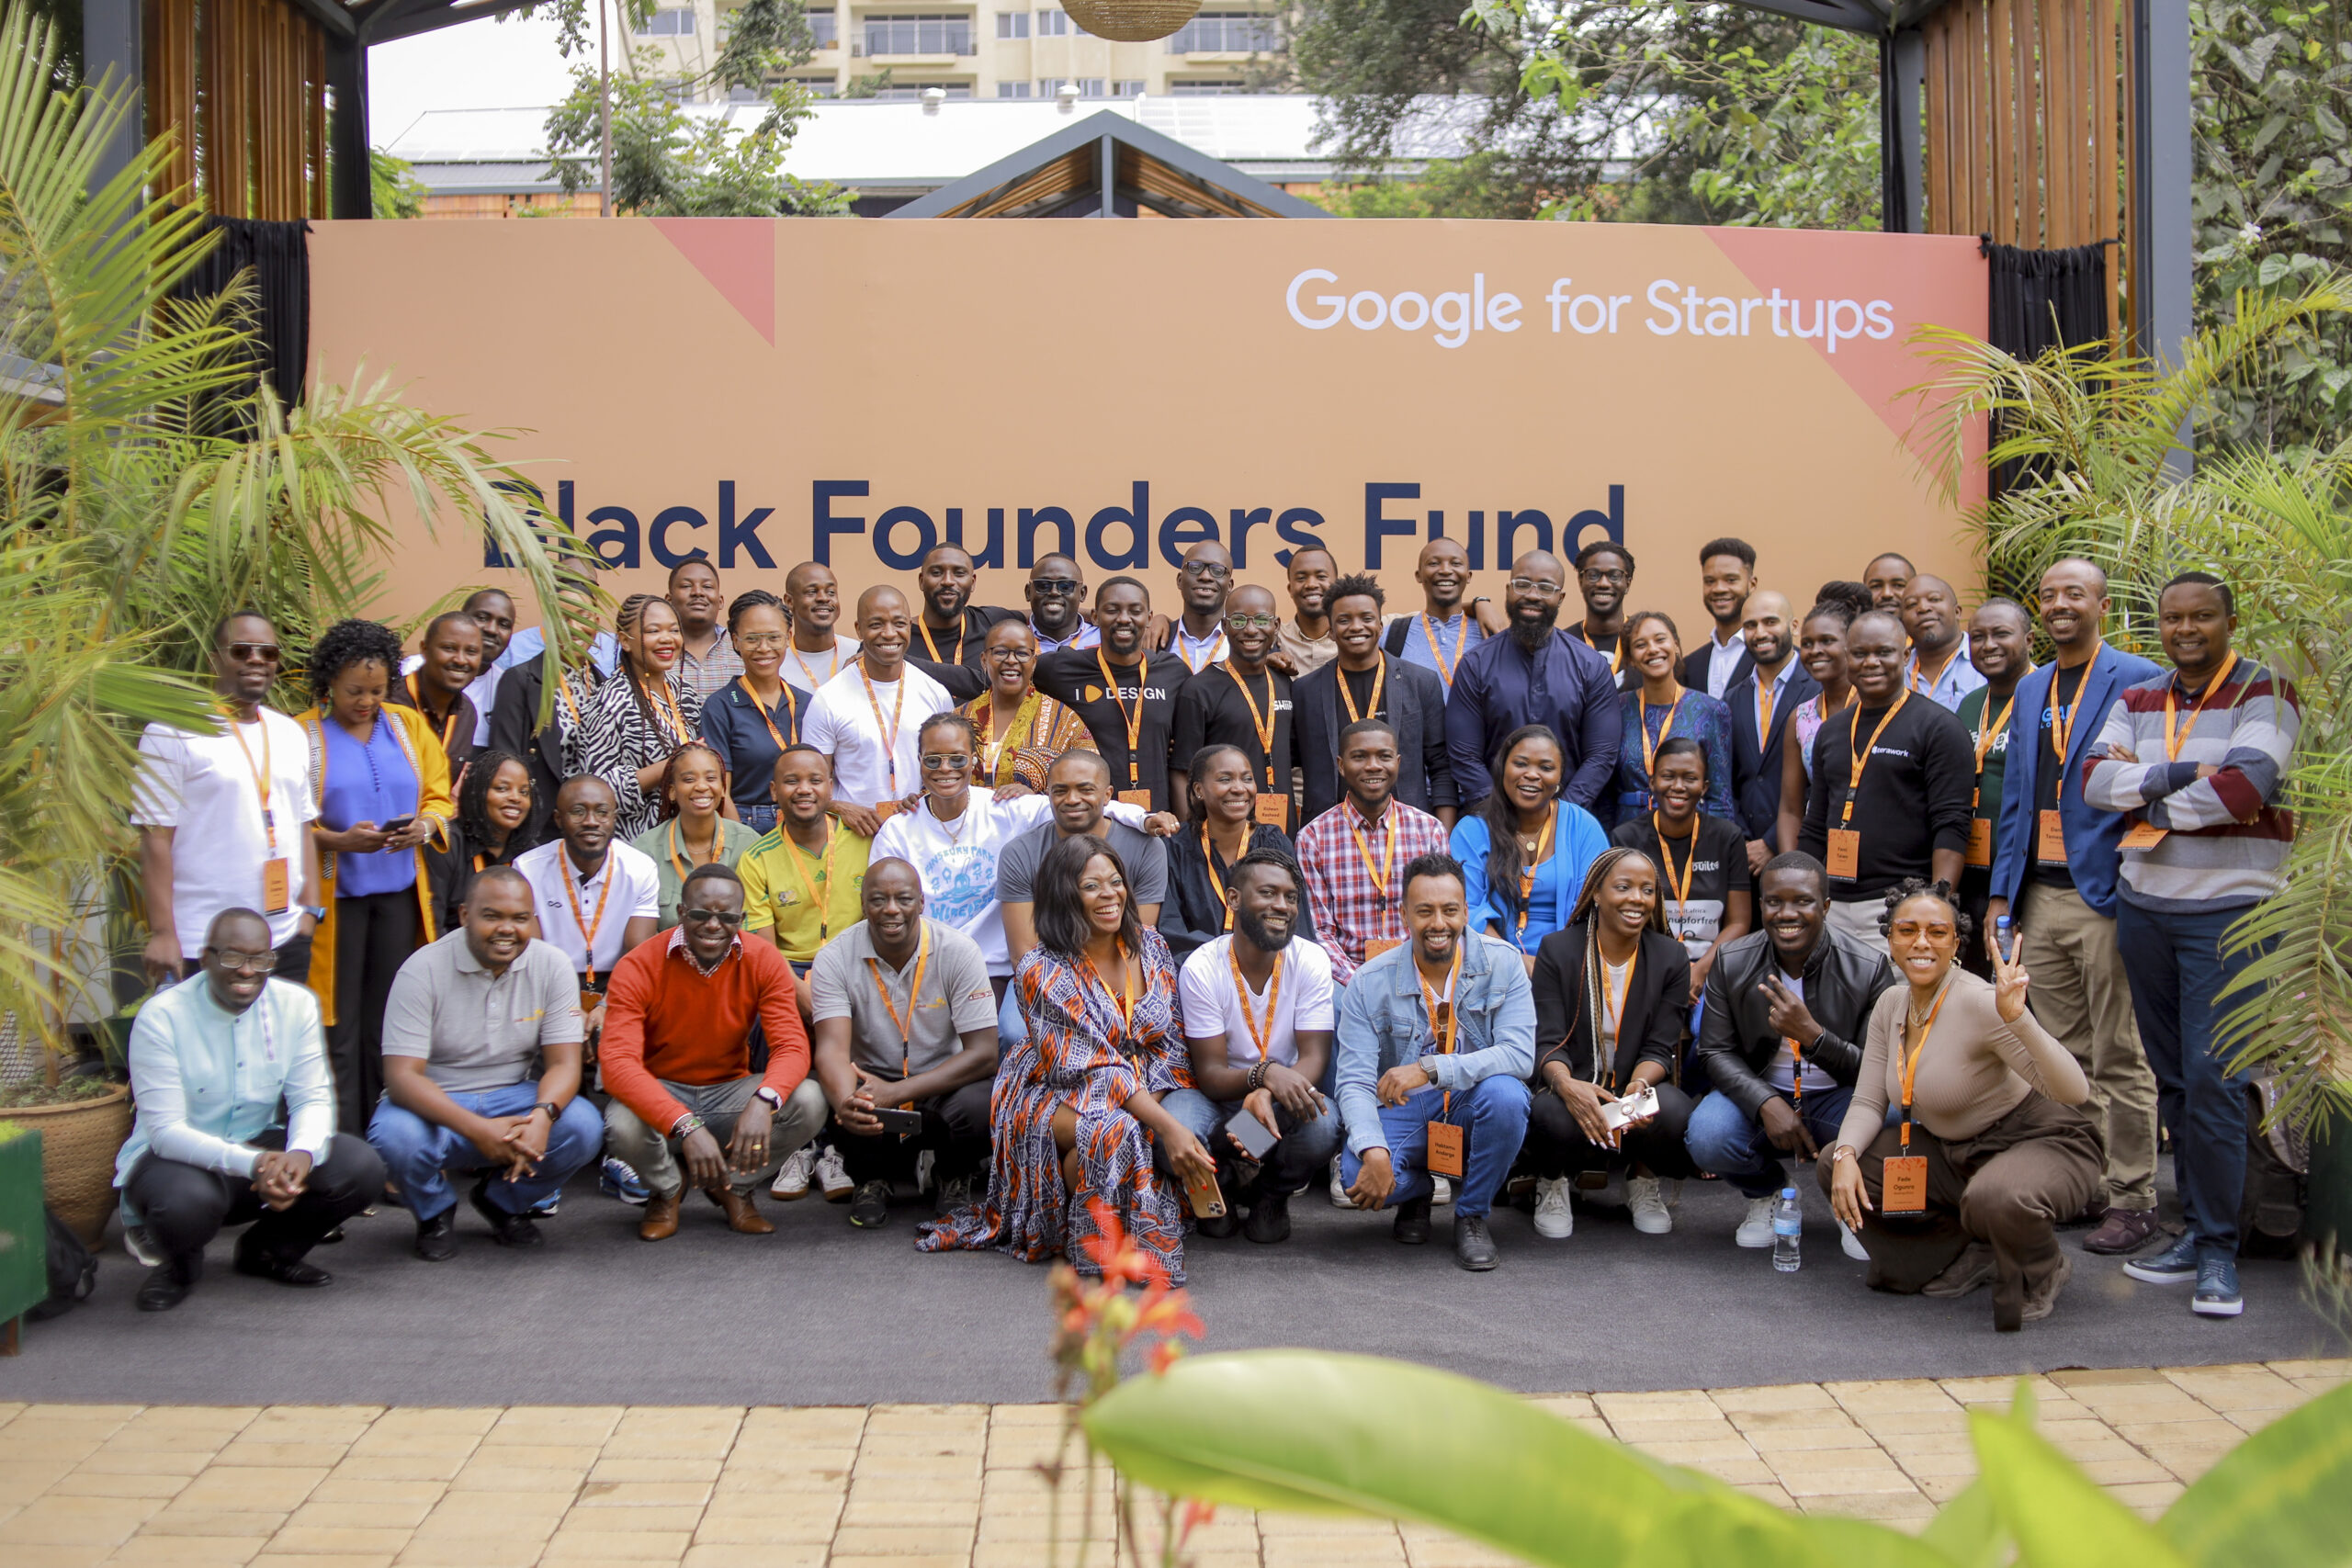 Black Founders Fund class of 2022